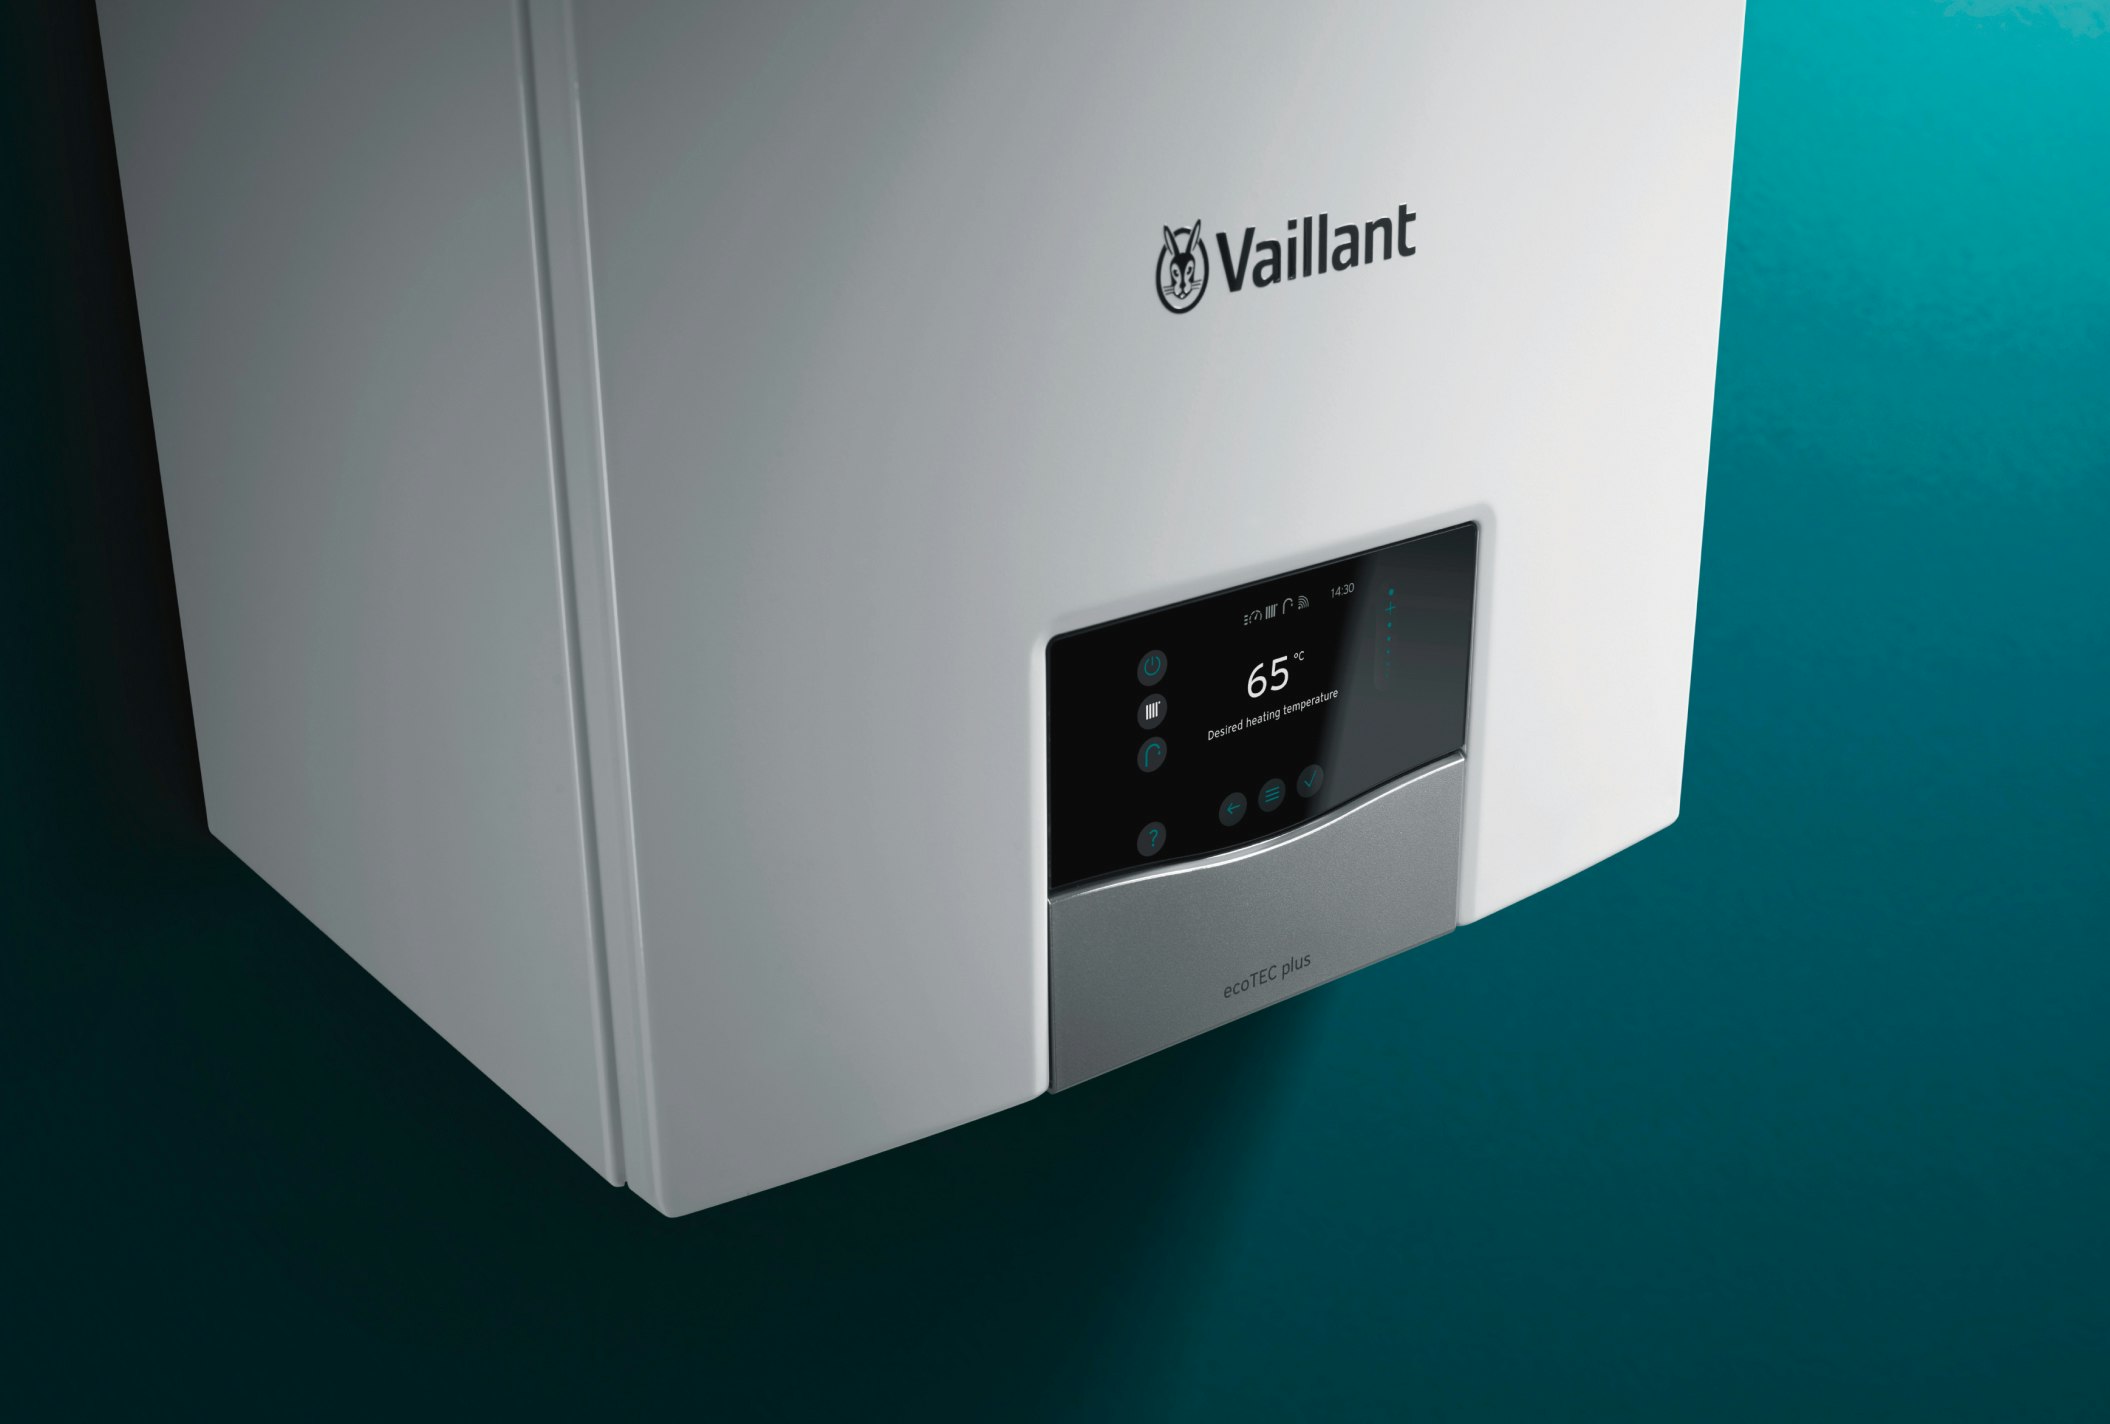 A close up shot of the front control panel of a Vaillant ecoTEC Plus boiler